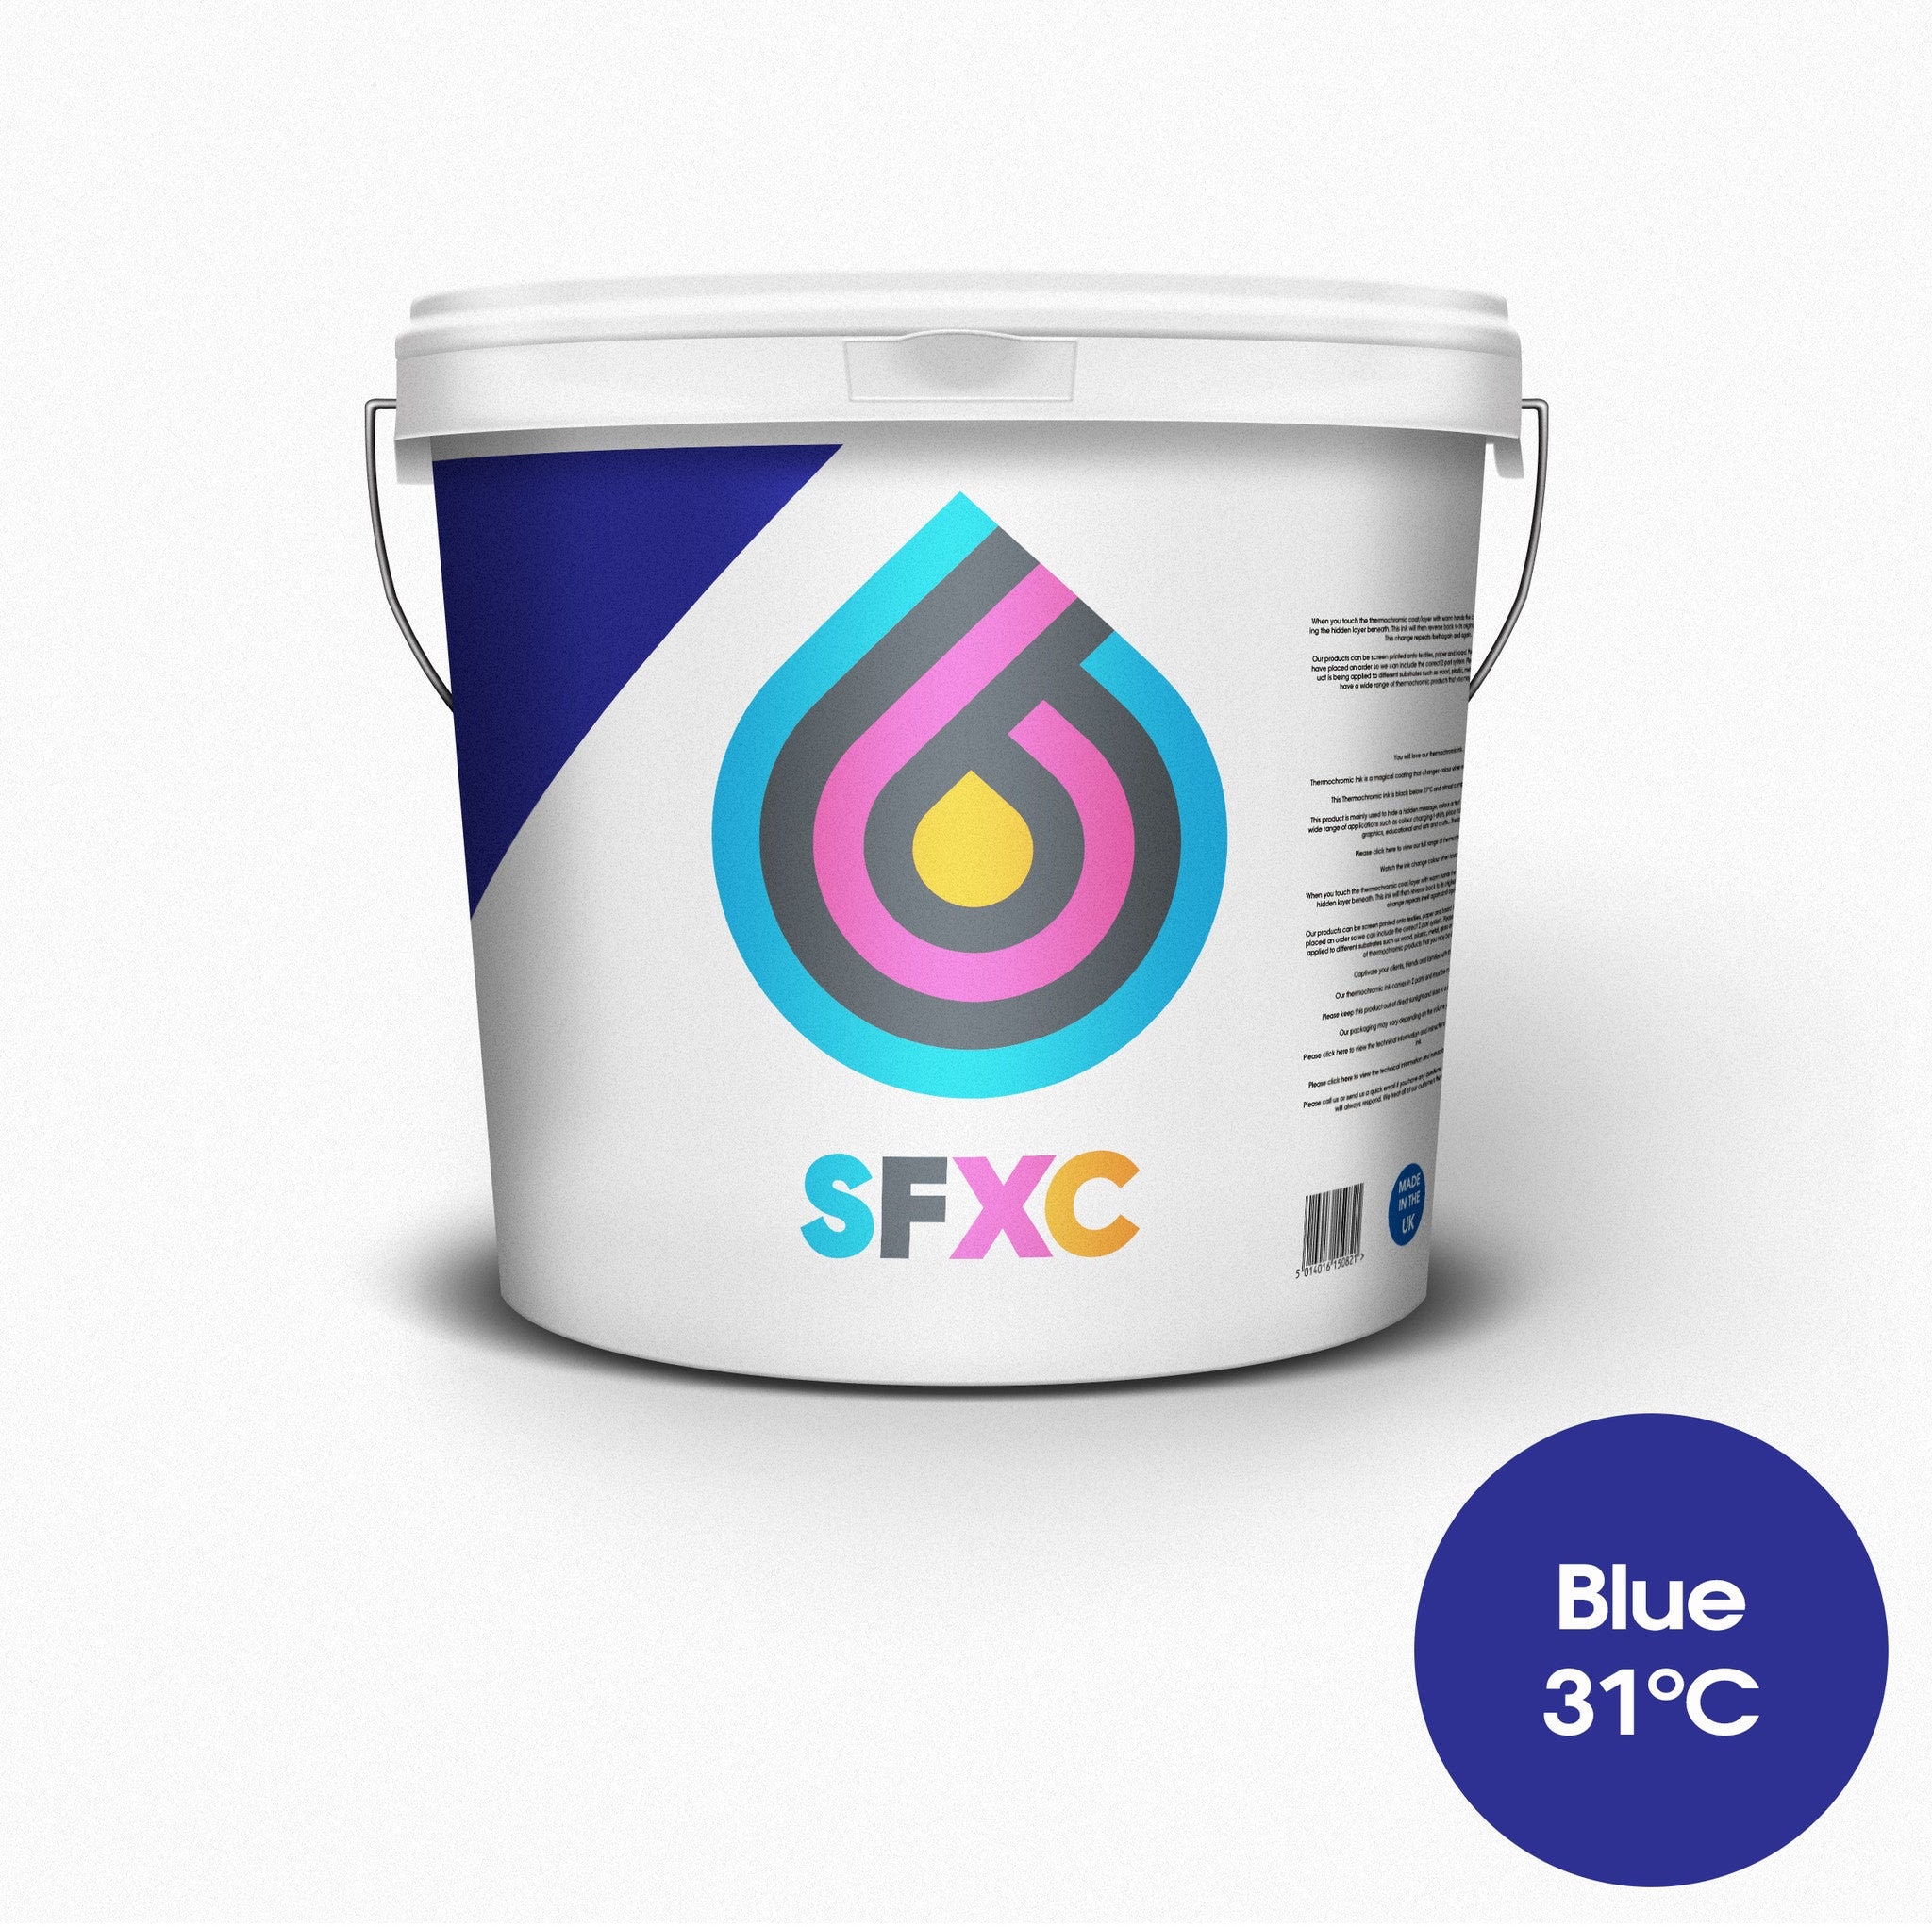 Thermochromic paints - Print Business info